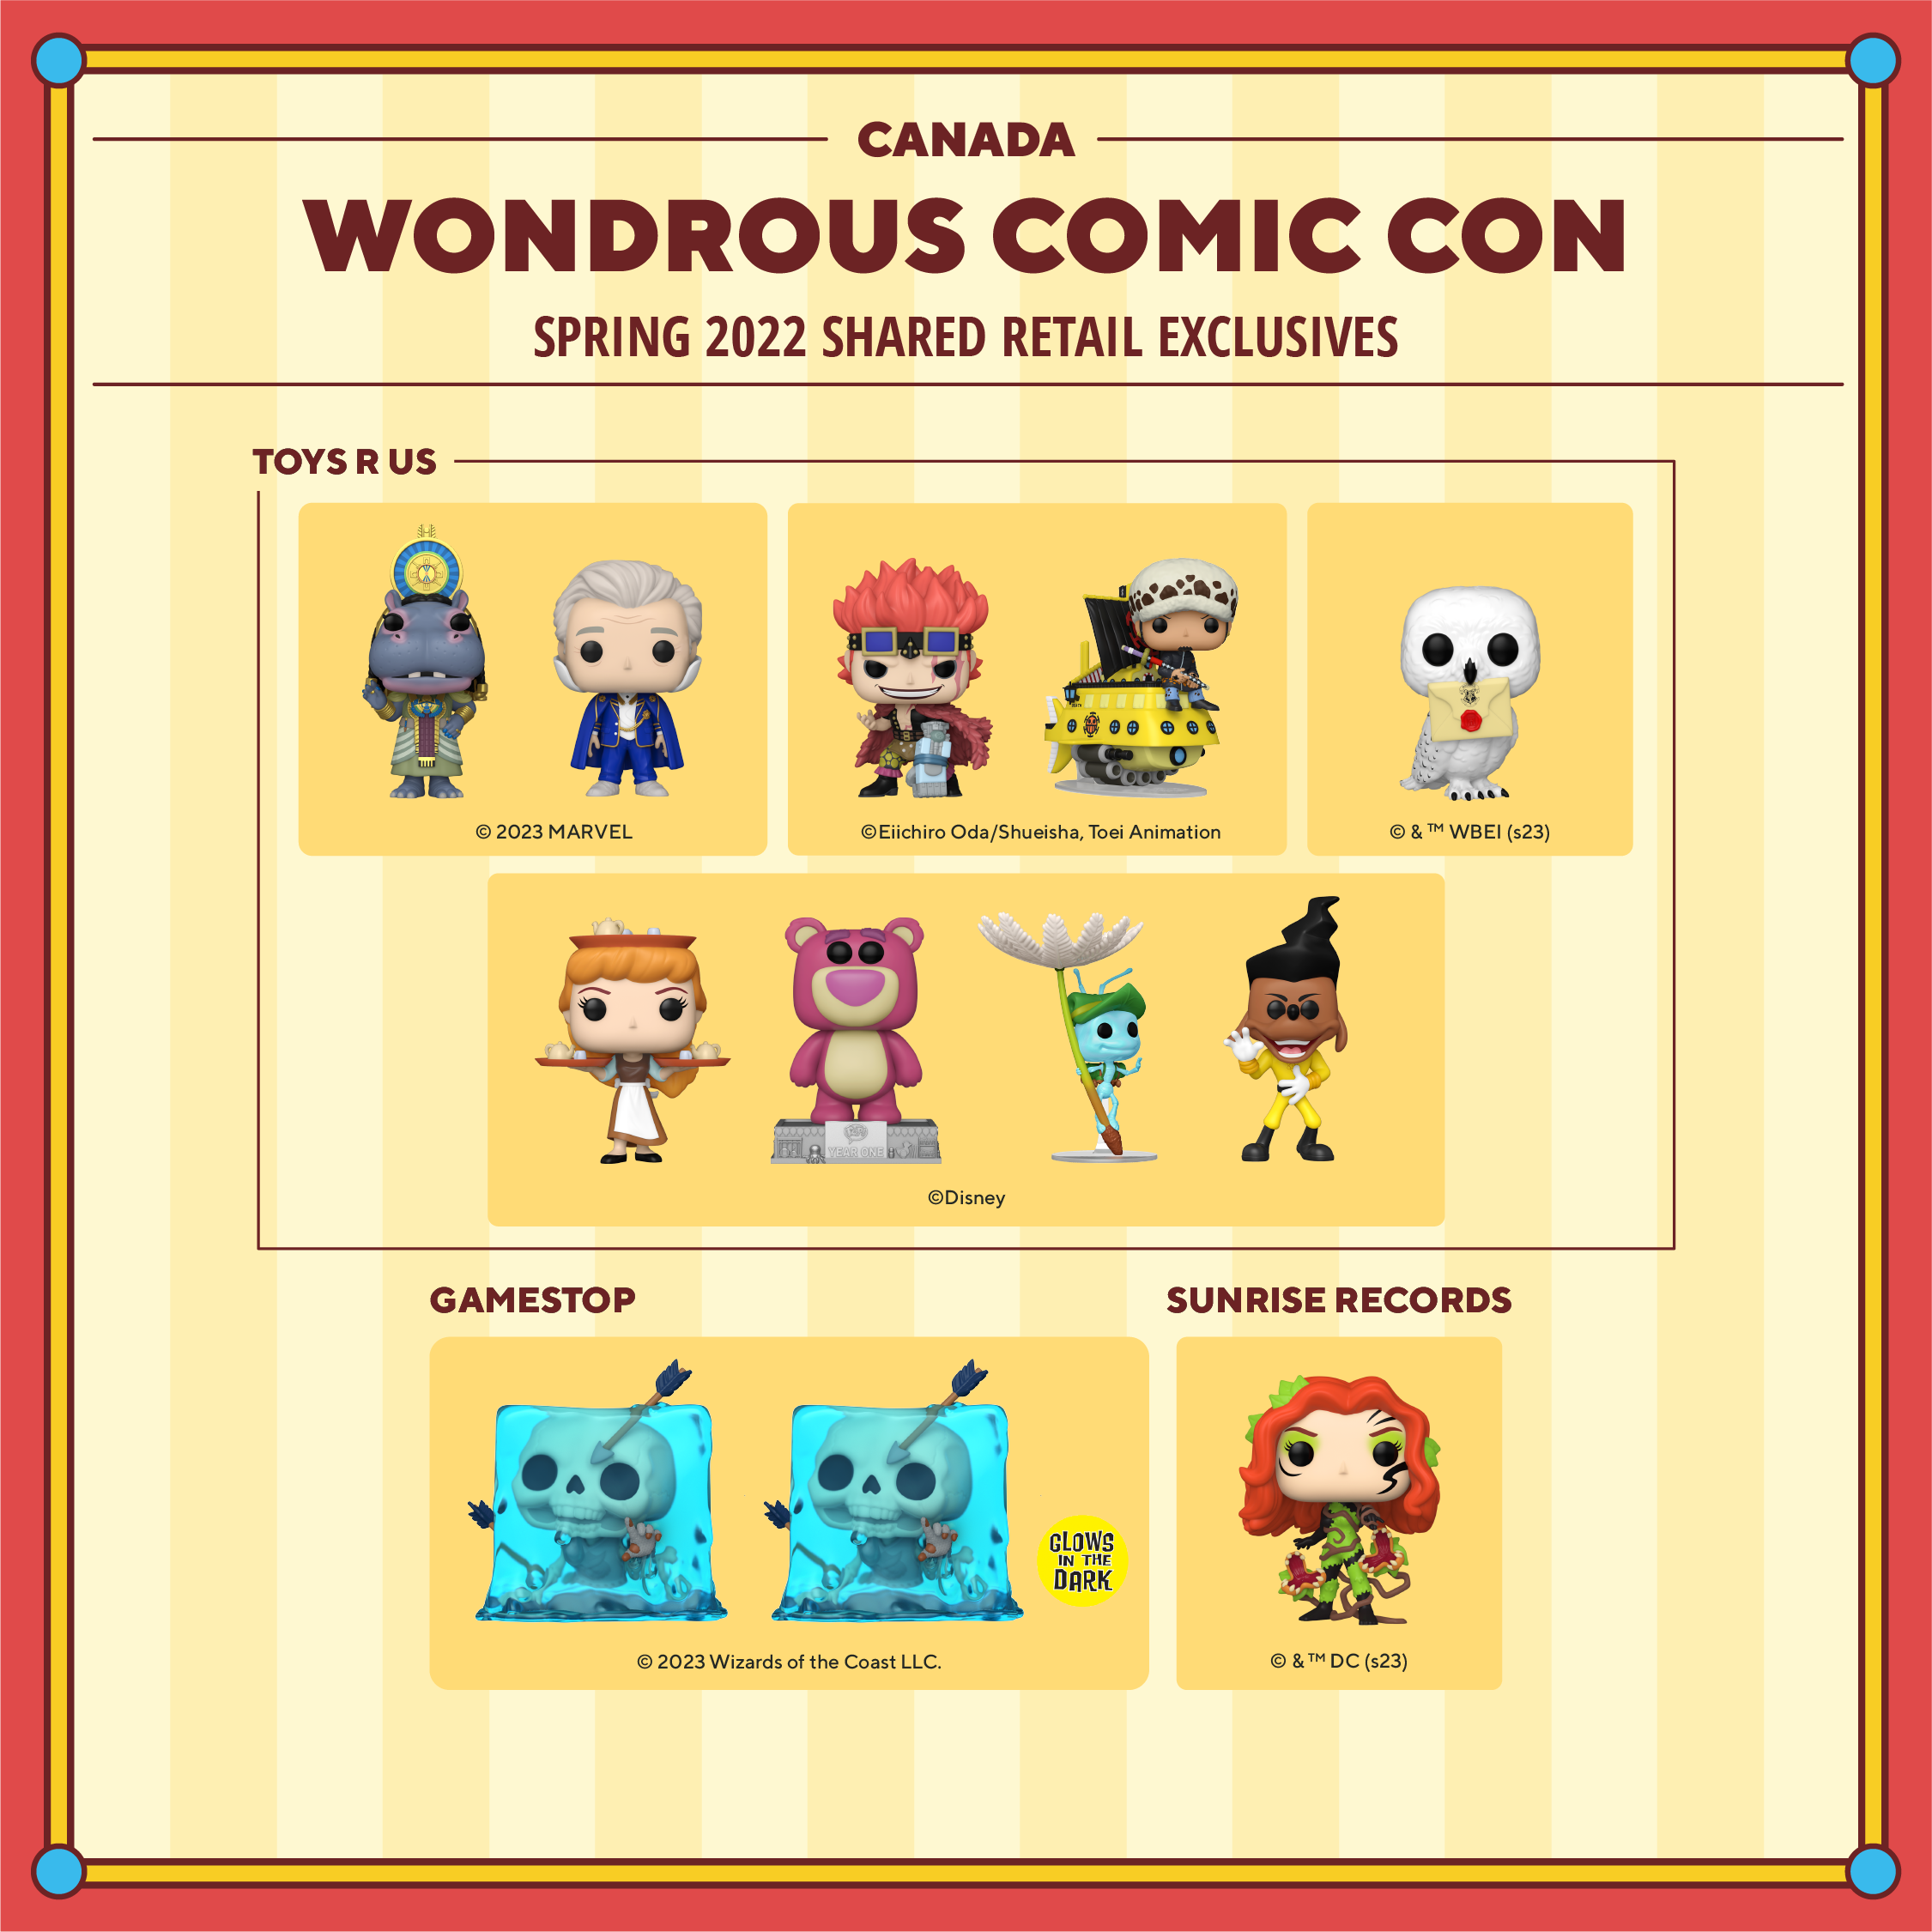 2023 WonderCon Canada shared retail exclusives. Toys R Us exclusives include: Pop! Taweret, Pop! Lord Krylar, Pop! Eustass Kid, Pop! Trafalgar Law on Polar Tang, Pop! Hedwig, Pop! Cinderella with Trays, Pop! Classics Lotso Bear, Pop! Flik on Dandelion Seed, and Pop! Powerline. GameStop exclusives include: Pop! Gelatinous Cube and glow-in-the-dark Pop! Gelatinous Cube. Sunrise Records exclusives include: Pop! Poison Ivy.